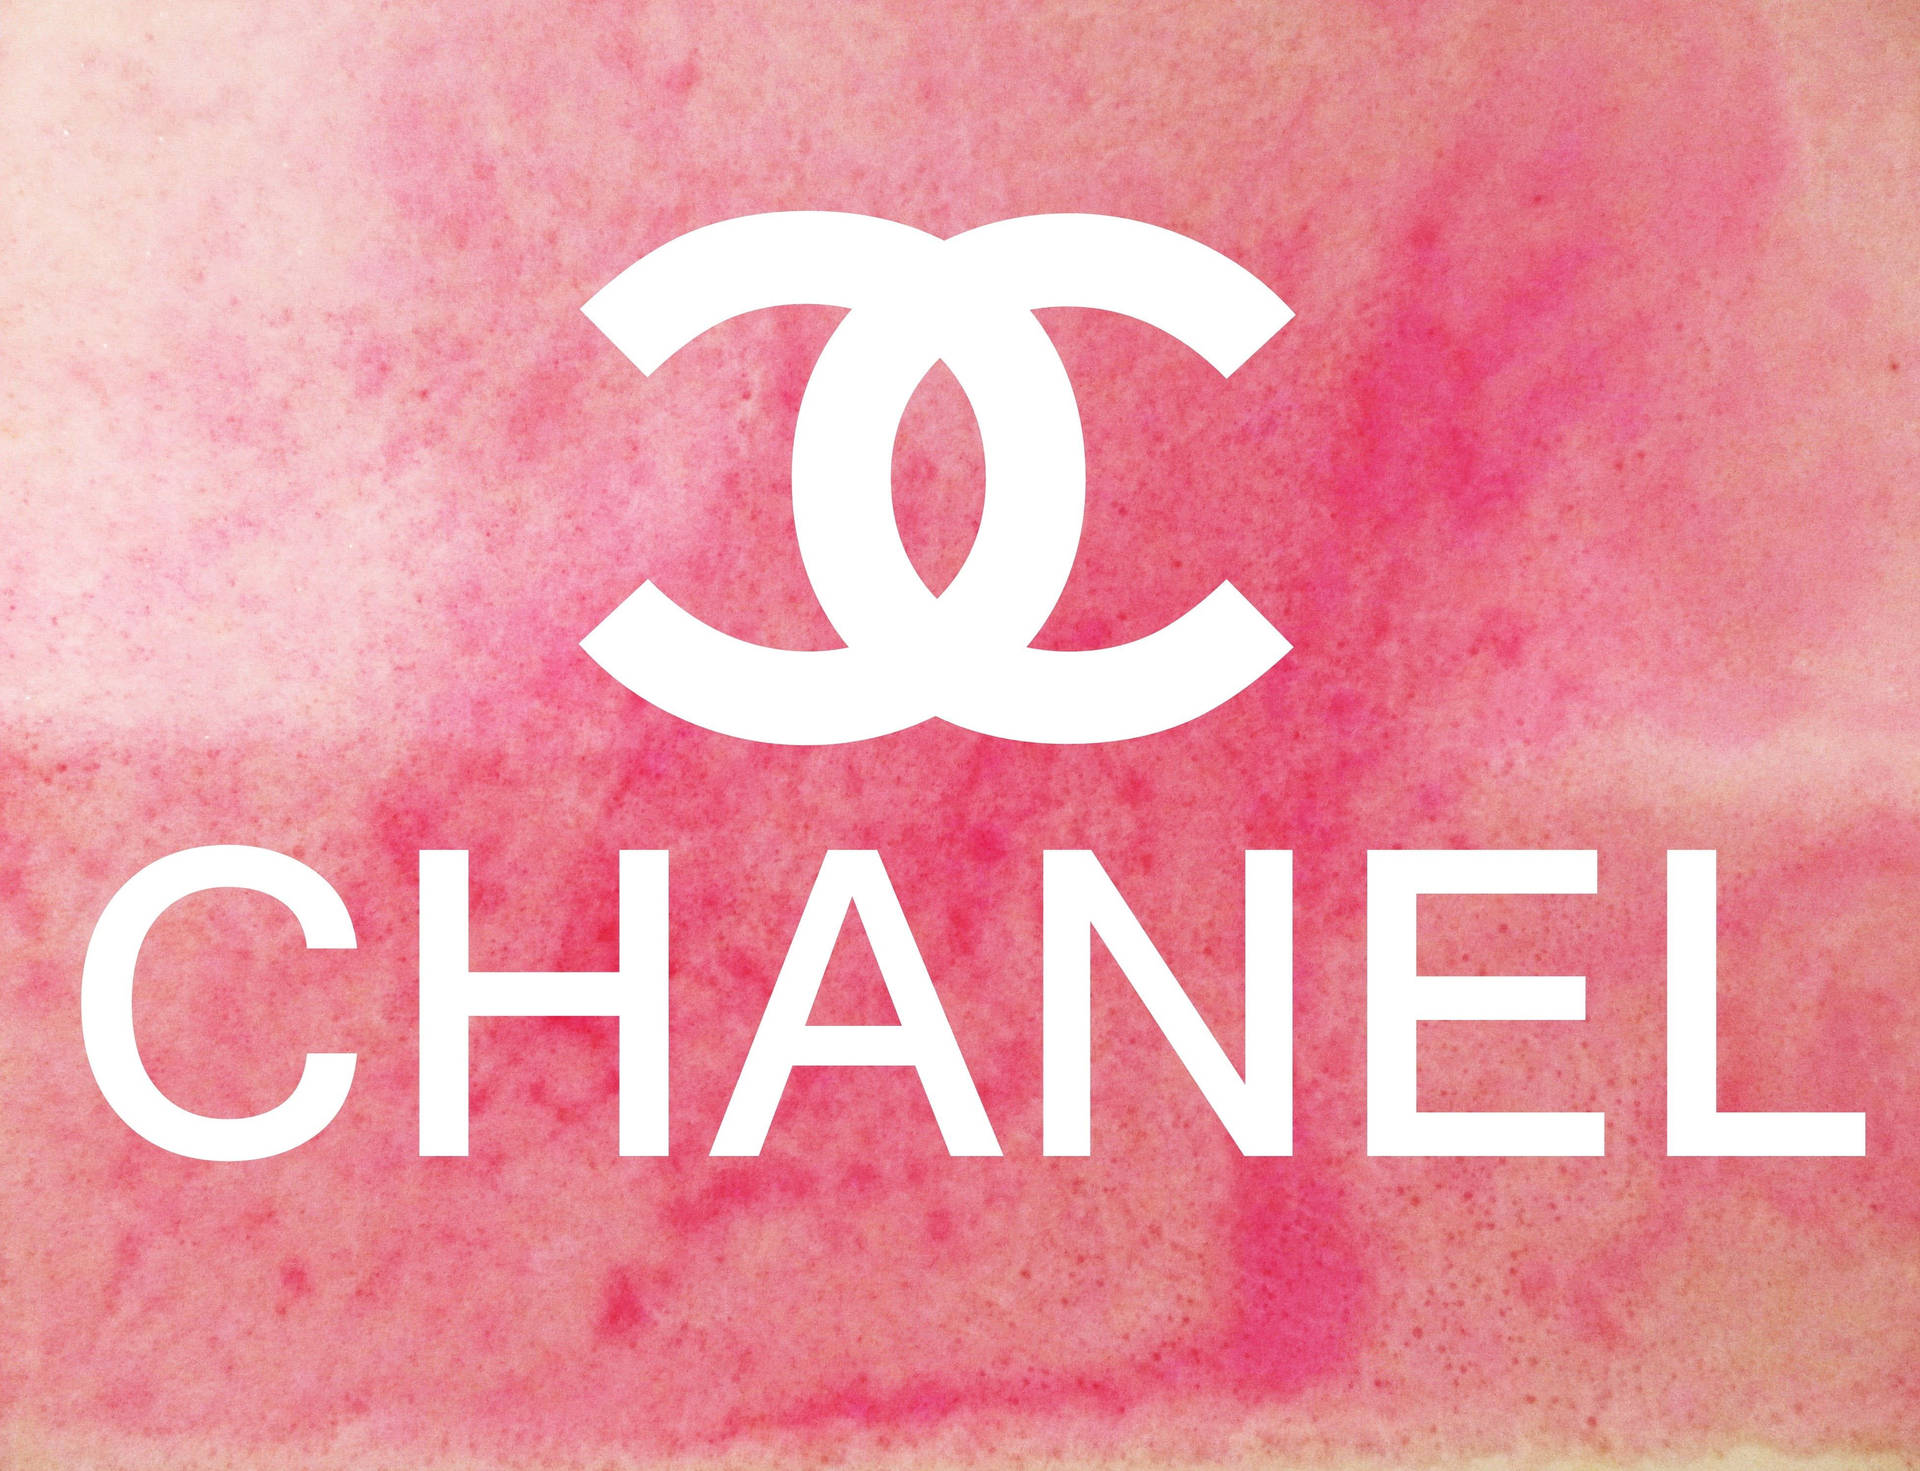 Abstract Pink Chanel Logo Background